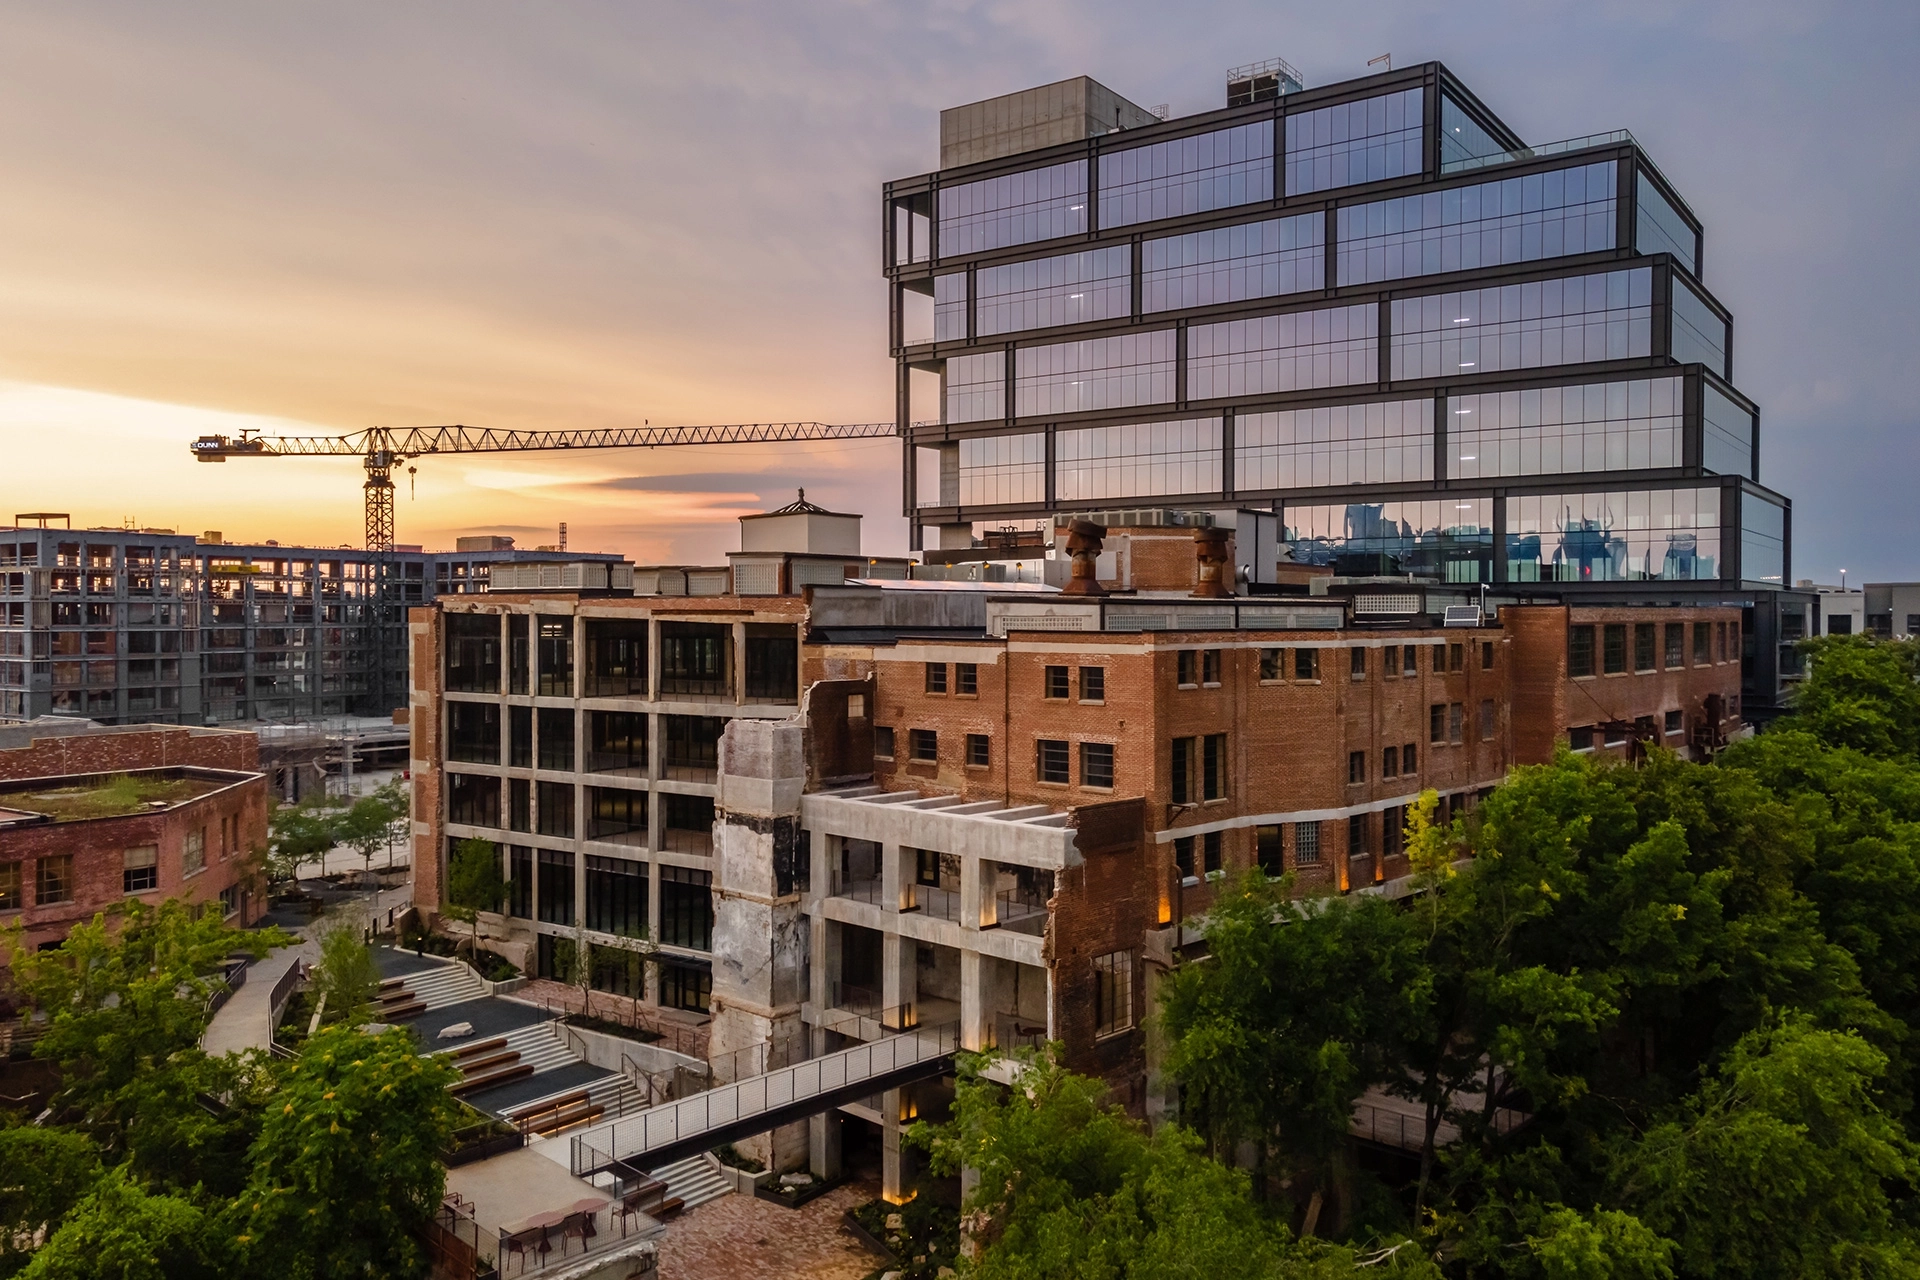 An urban sunset in Nashville highlighting a mix of old brick buildings and a modern glass office structure, with construction in the background.